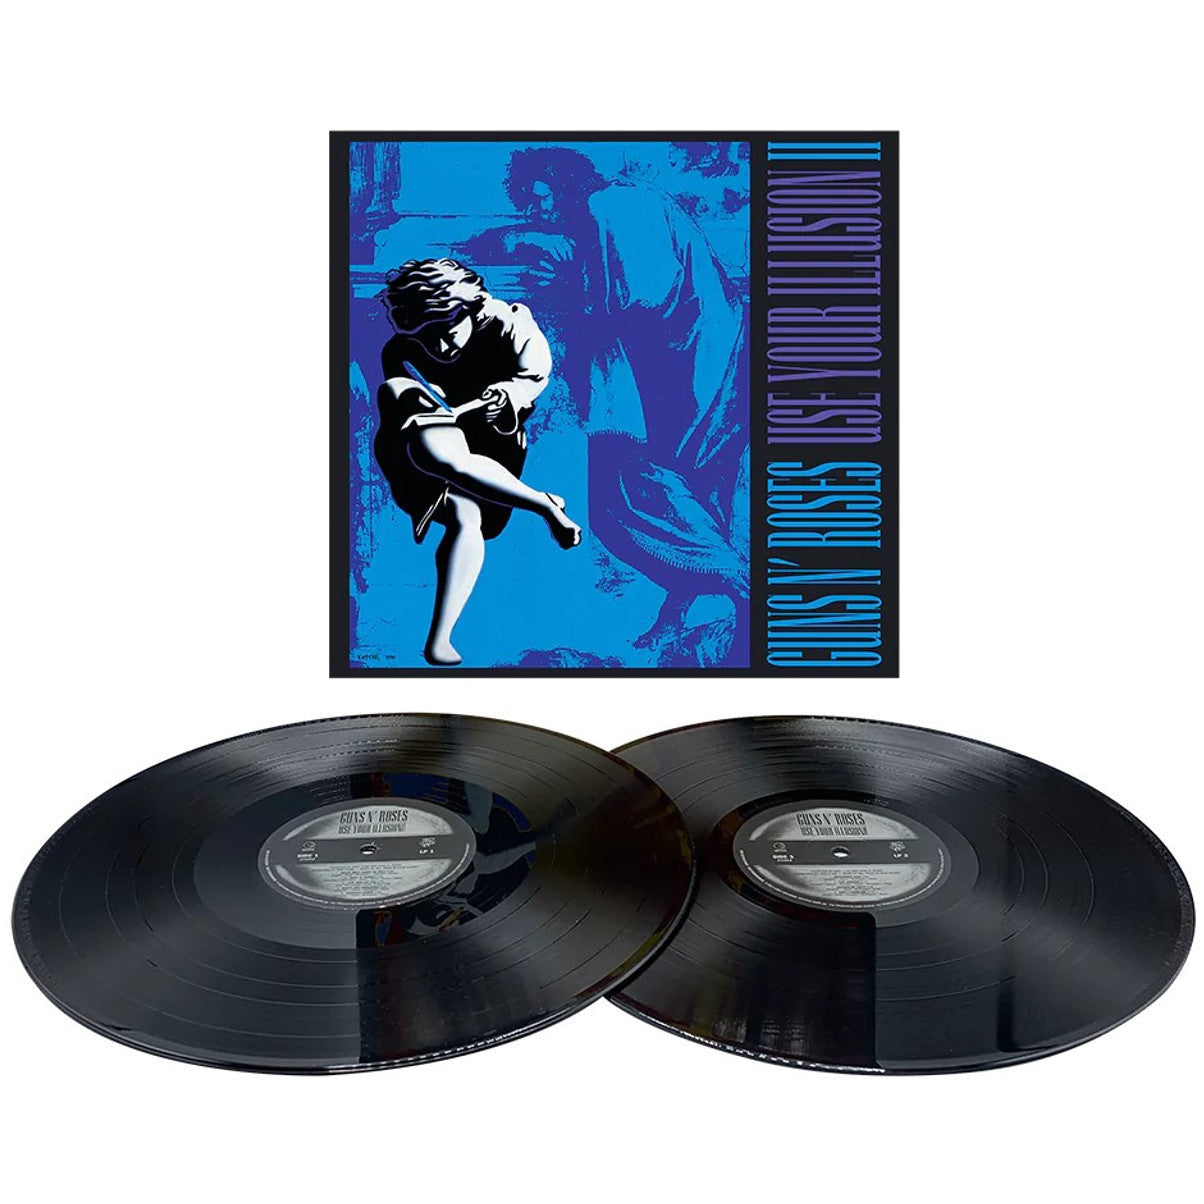 Guns N' Roses - Use Your Illusion II - LP